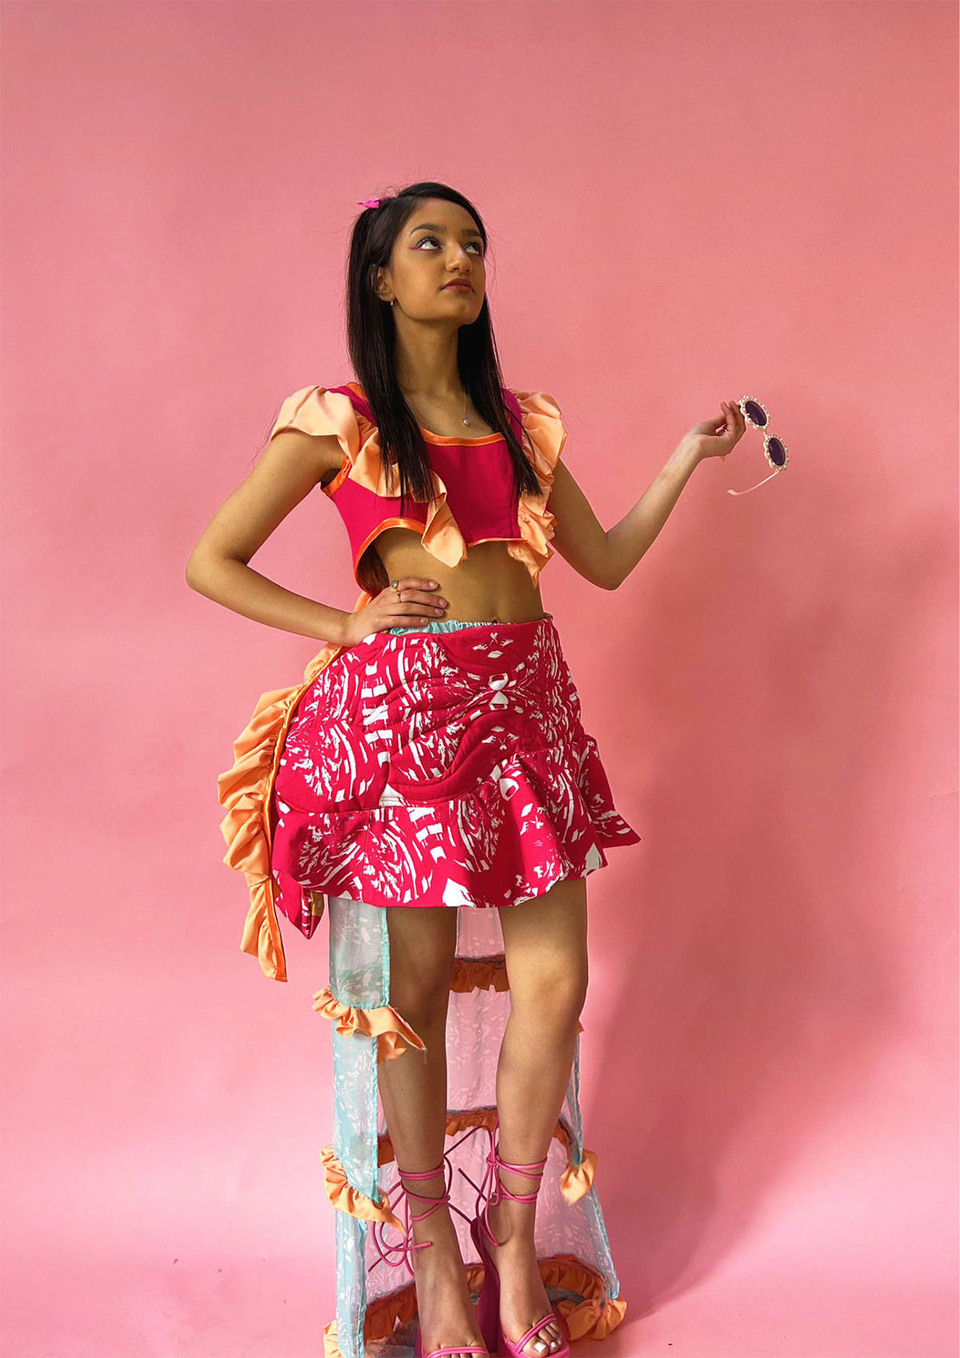 Woman models a skirt and top in pink and peach design from 'Forget Me Not' a collection by Jessica Neilson 